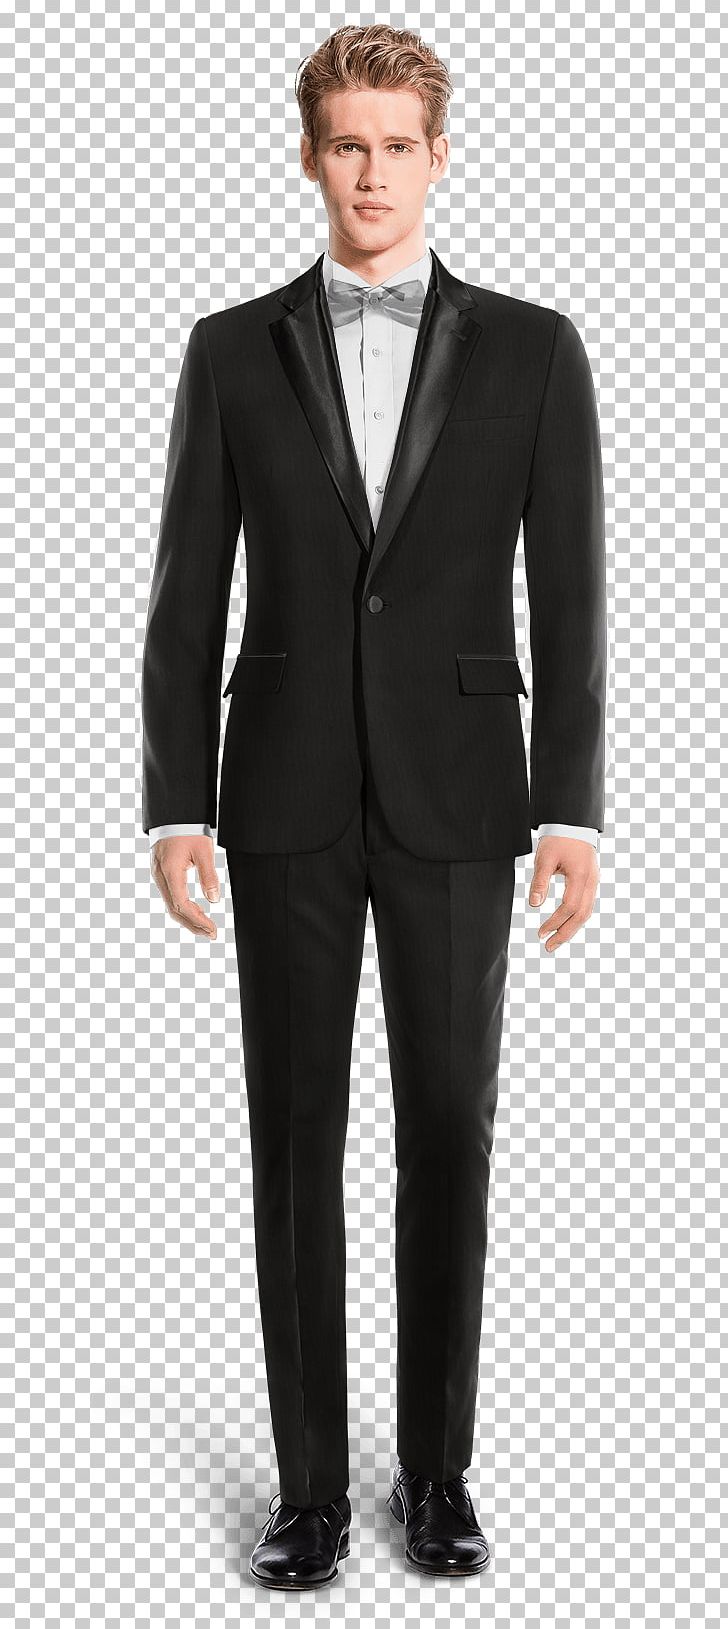 Suit Double-breasted Tuxedo Tailcoat PNG, Clipart, Blazer, Business, Businessperson, Clothing, Coat Free PNG Download